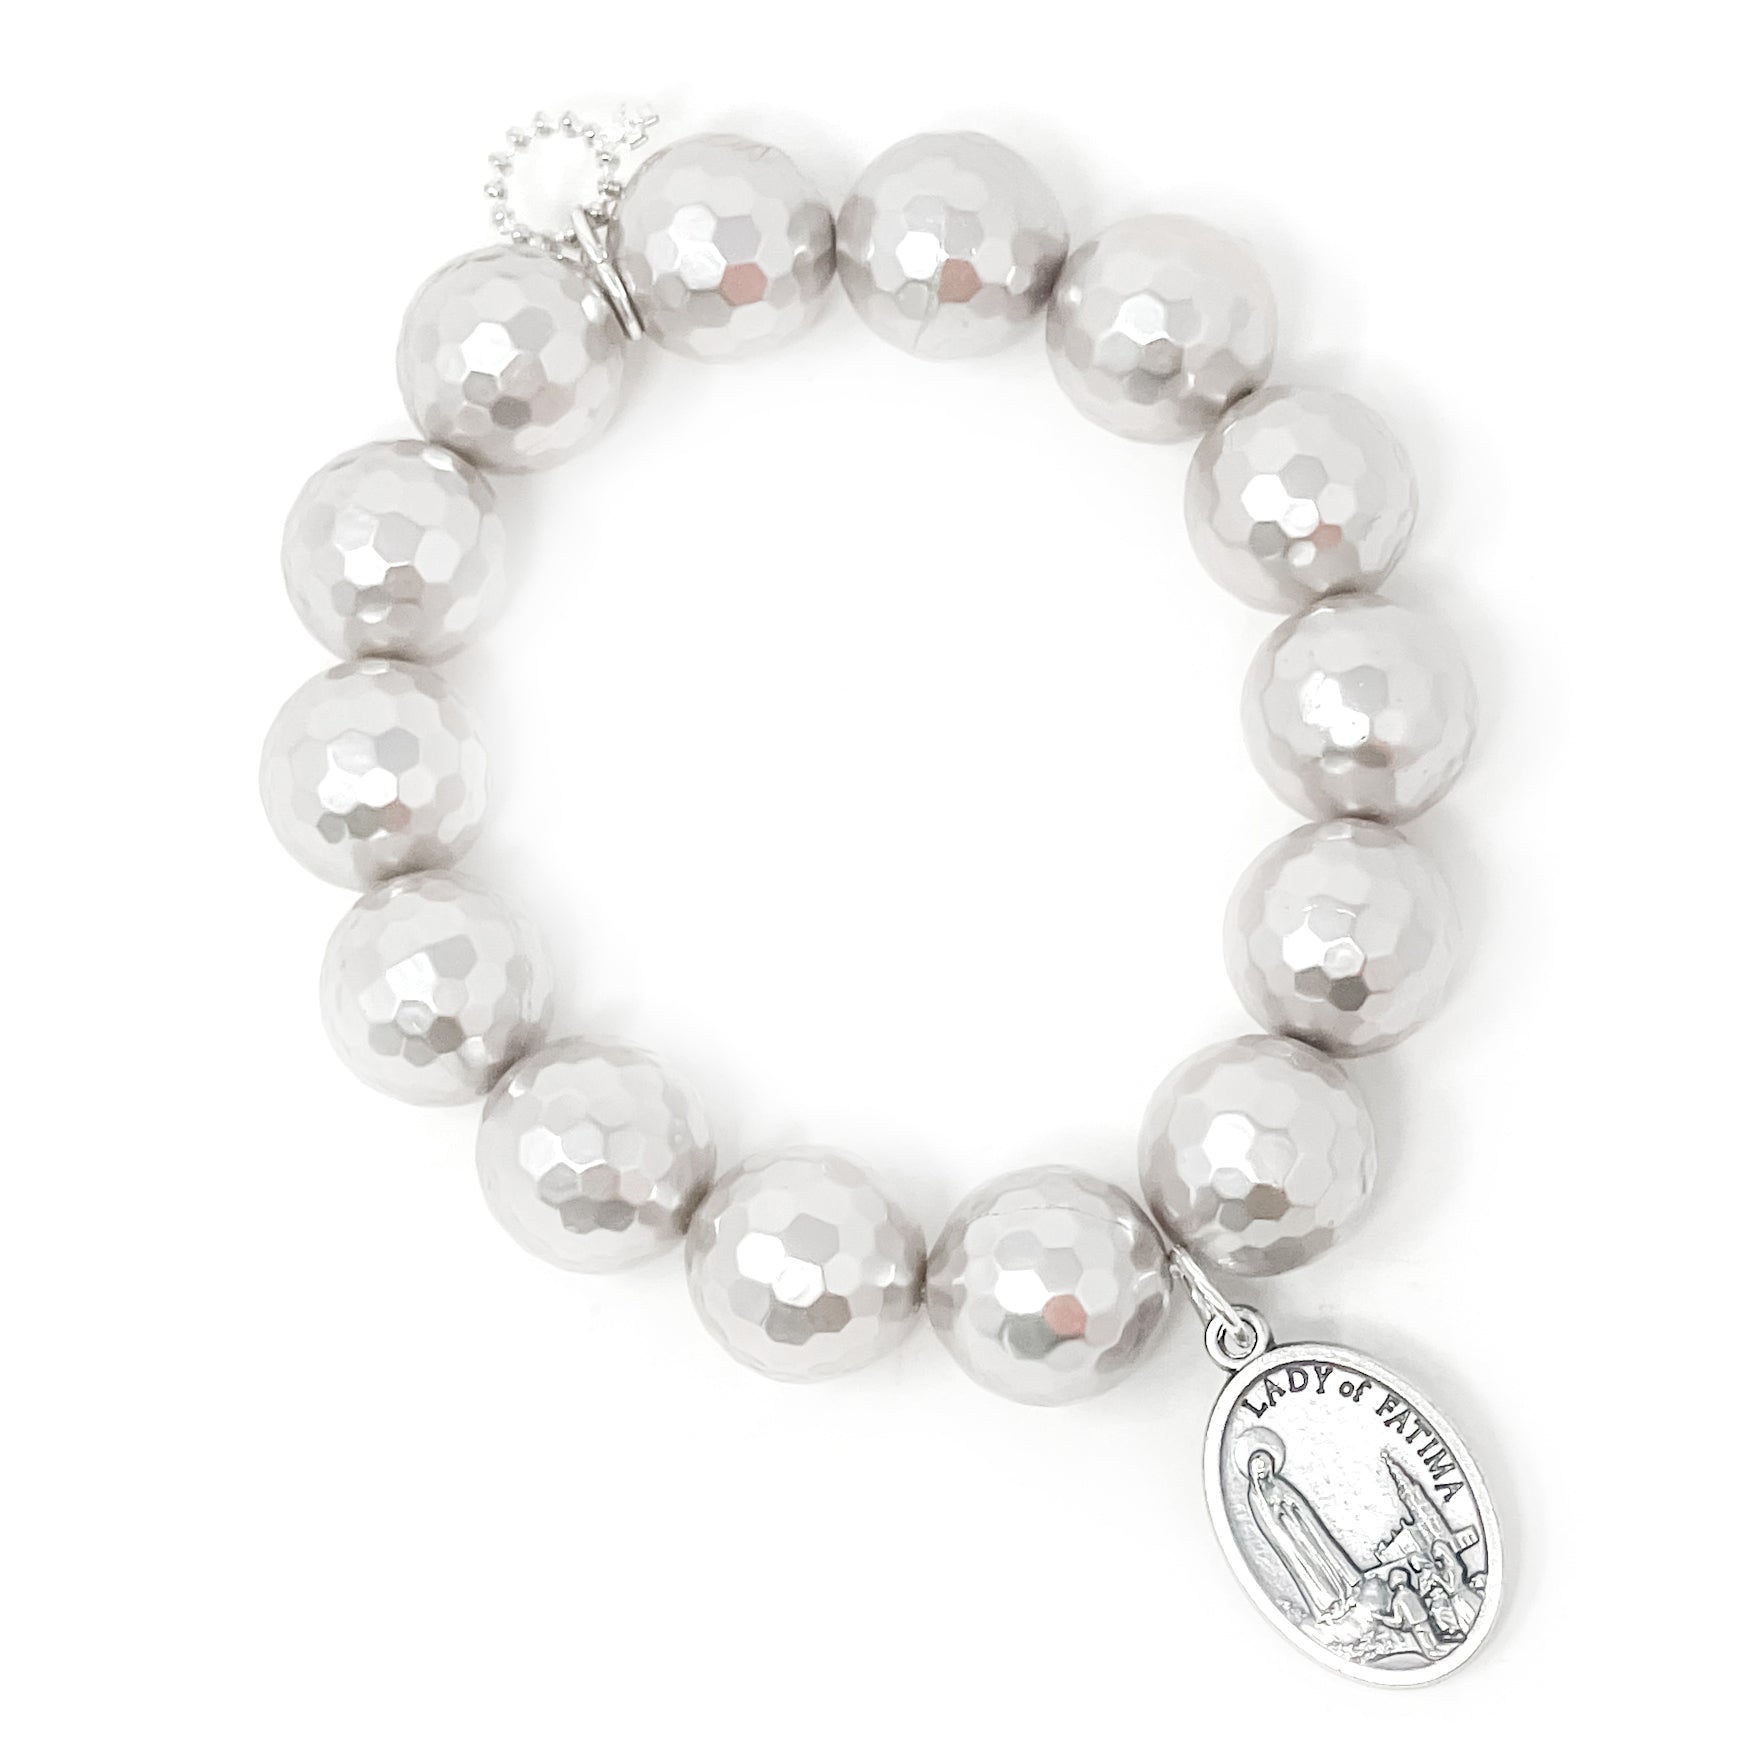 PowerBeads by jen Jewelry Average 7" Faceted Mother of Pearl with Lady of Fatima-Patron Saint of Health & Wealth